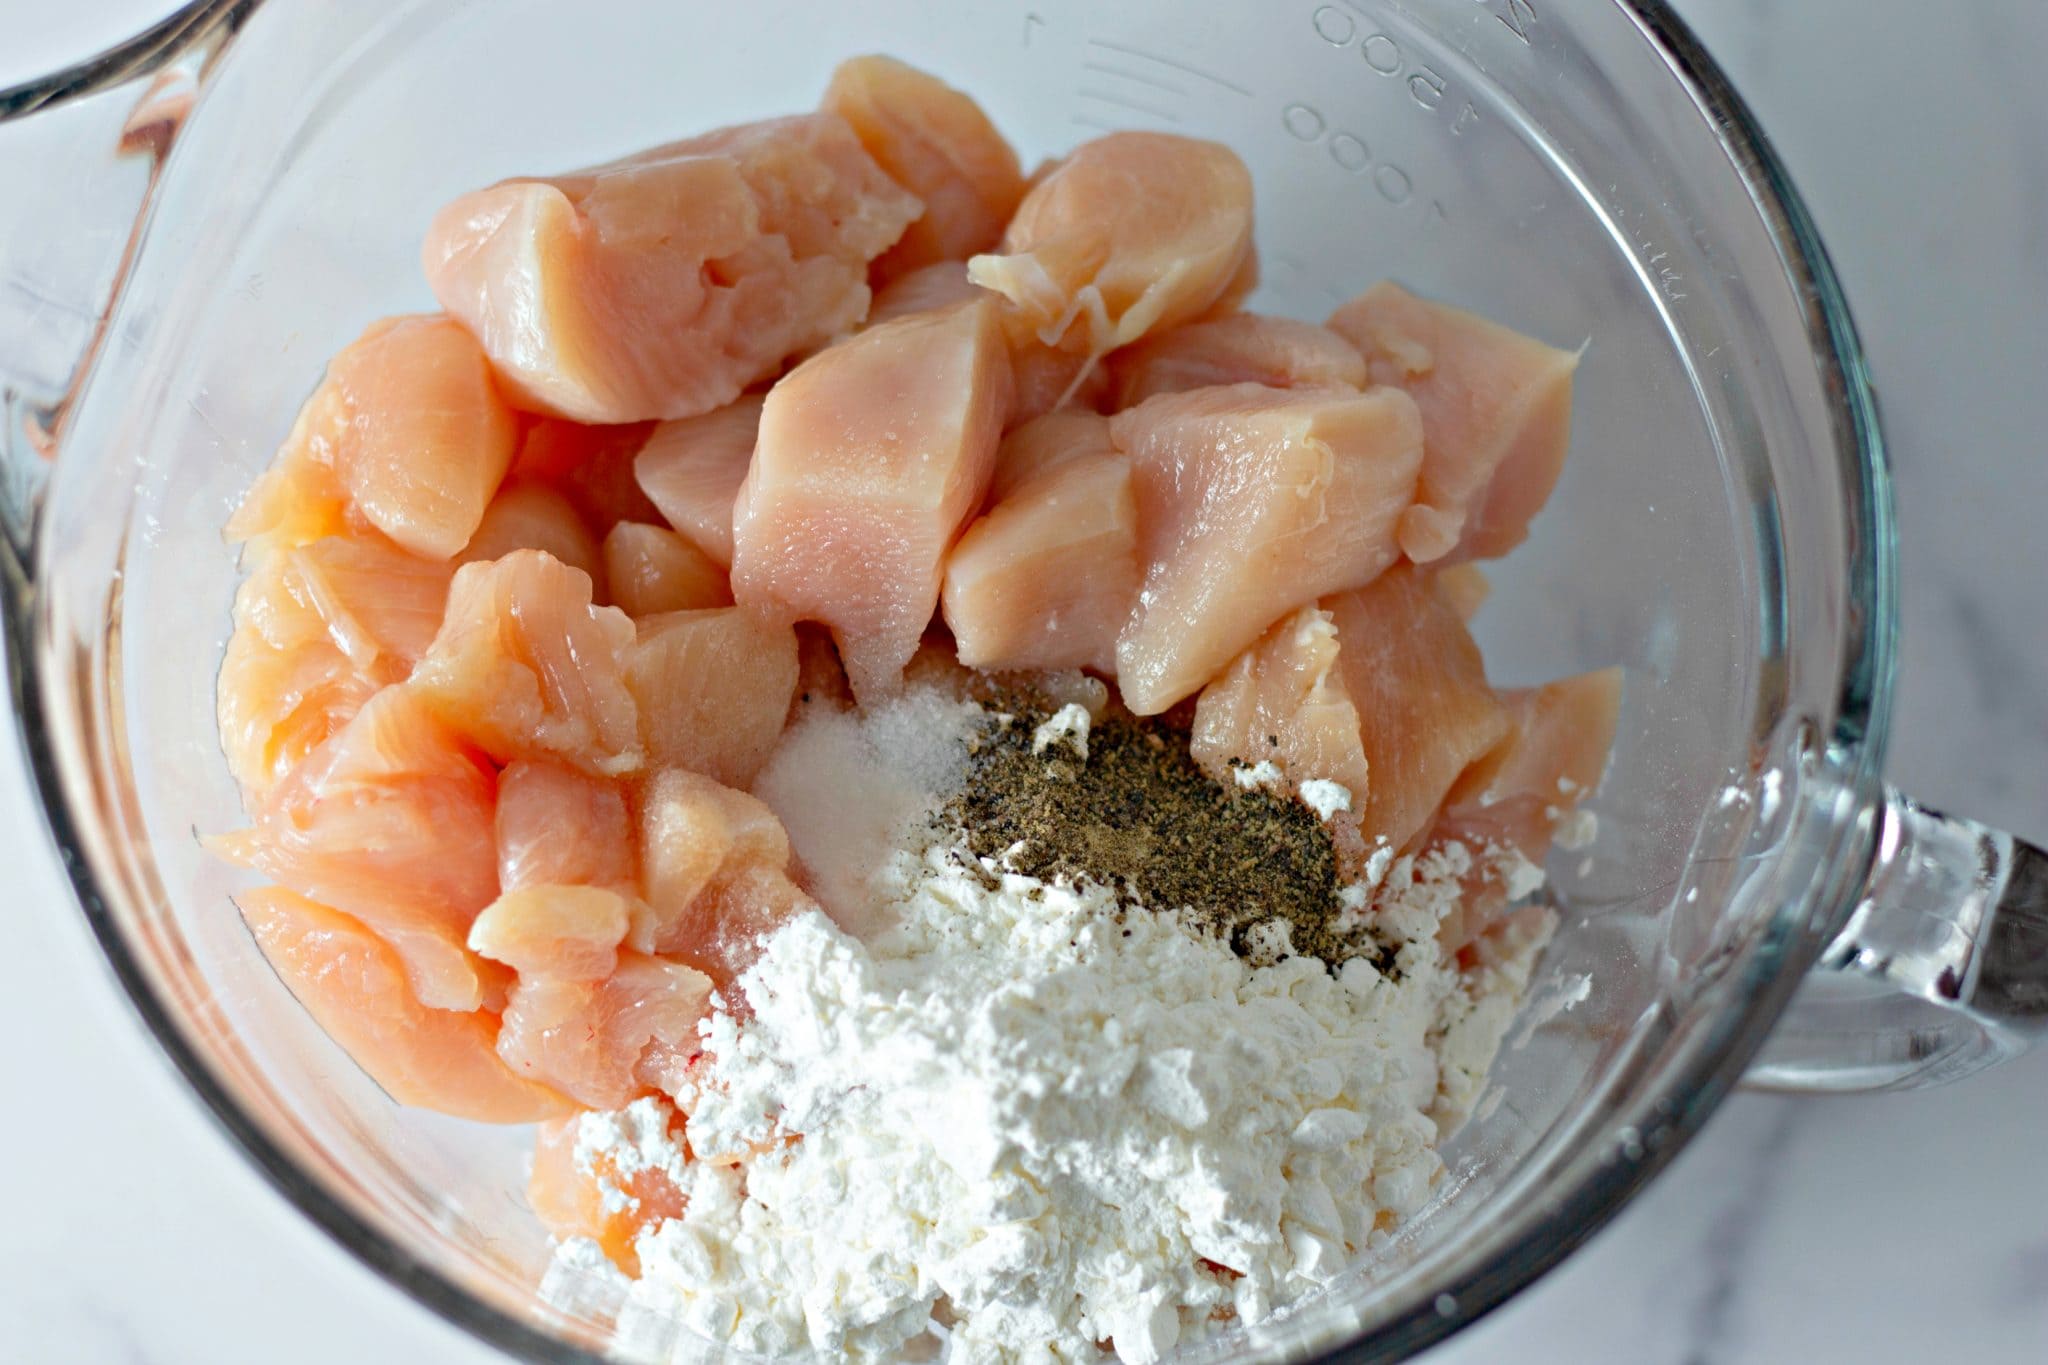 Chunks of raw chicken, cornstarch, and seasonings in a bowl